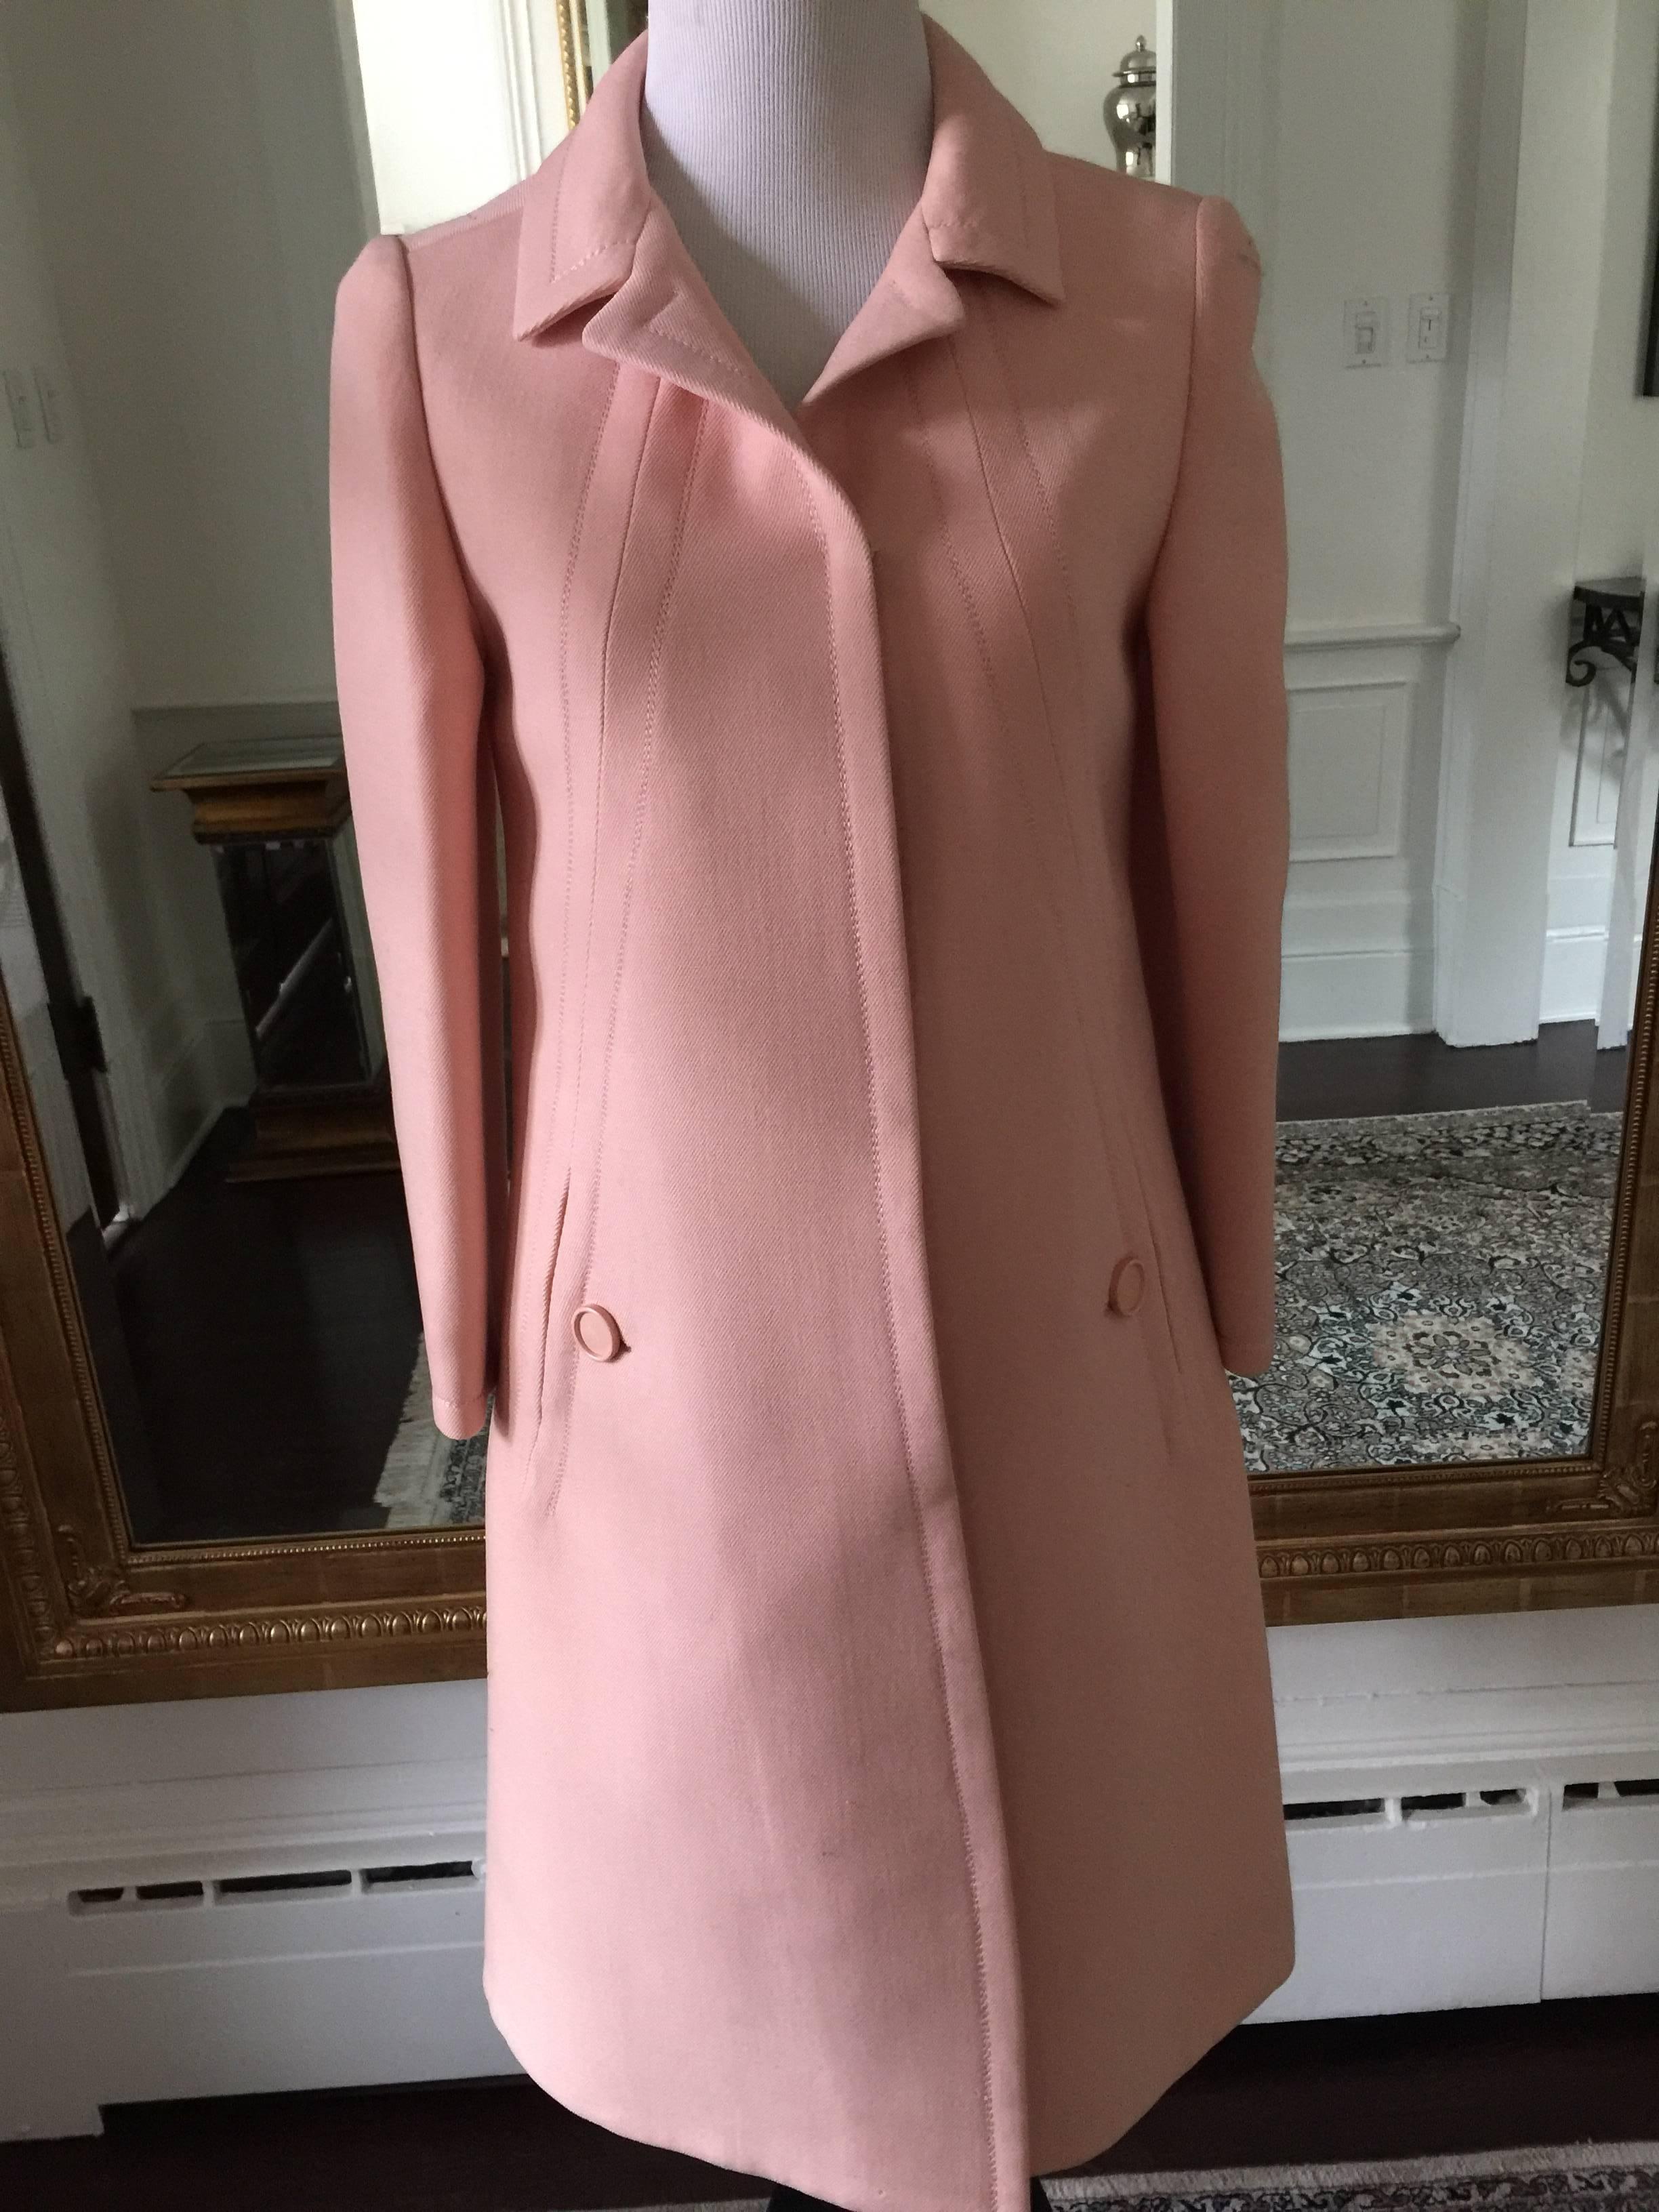  Rare Gorgeous Pink Jean Patou wool coat.  Elegant and timeless in the softest pink colour.
Jacky O style... stiching all along the back.
This coat really shows off Jean Patou master craftsmanship